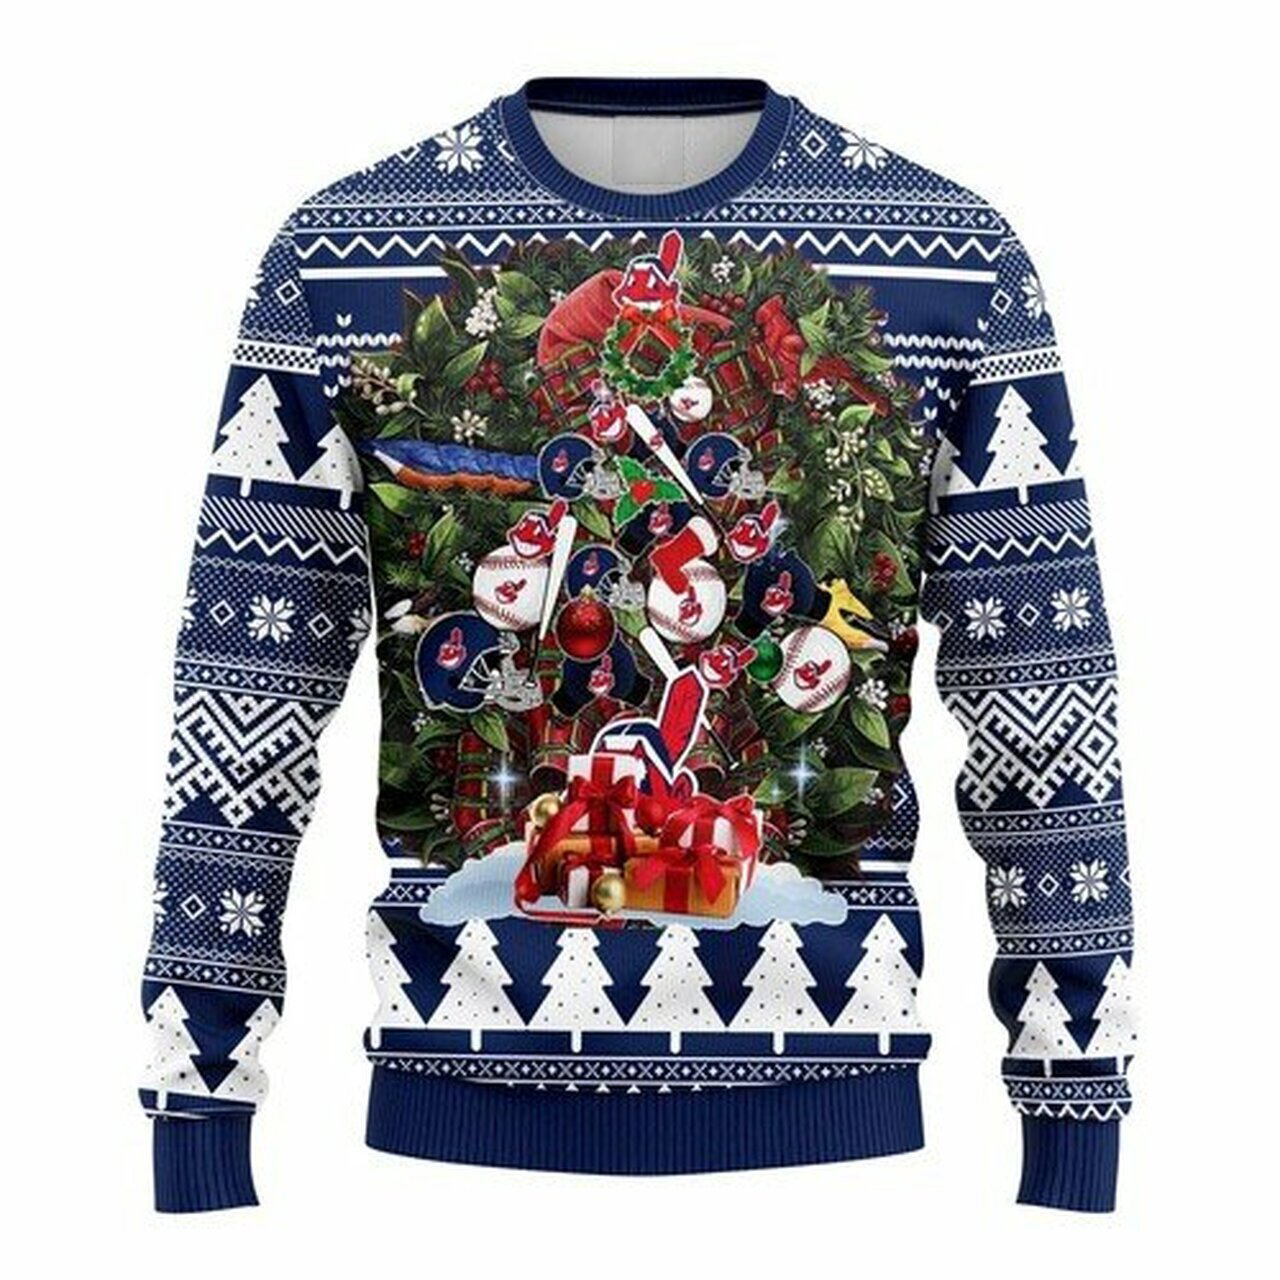 MLB Cleveland Indians christmas tree ugly sweater